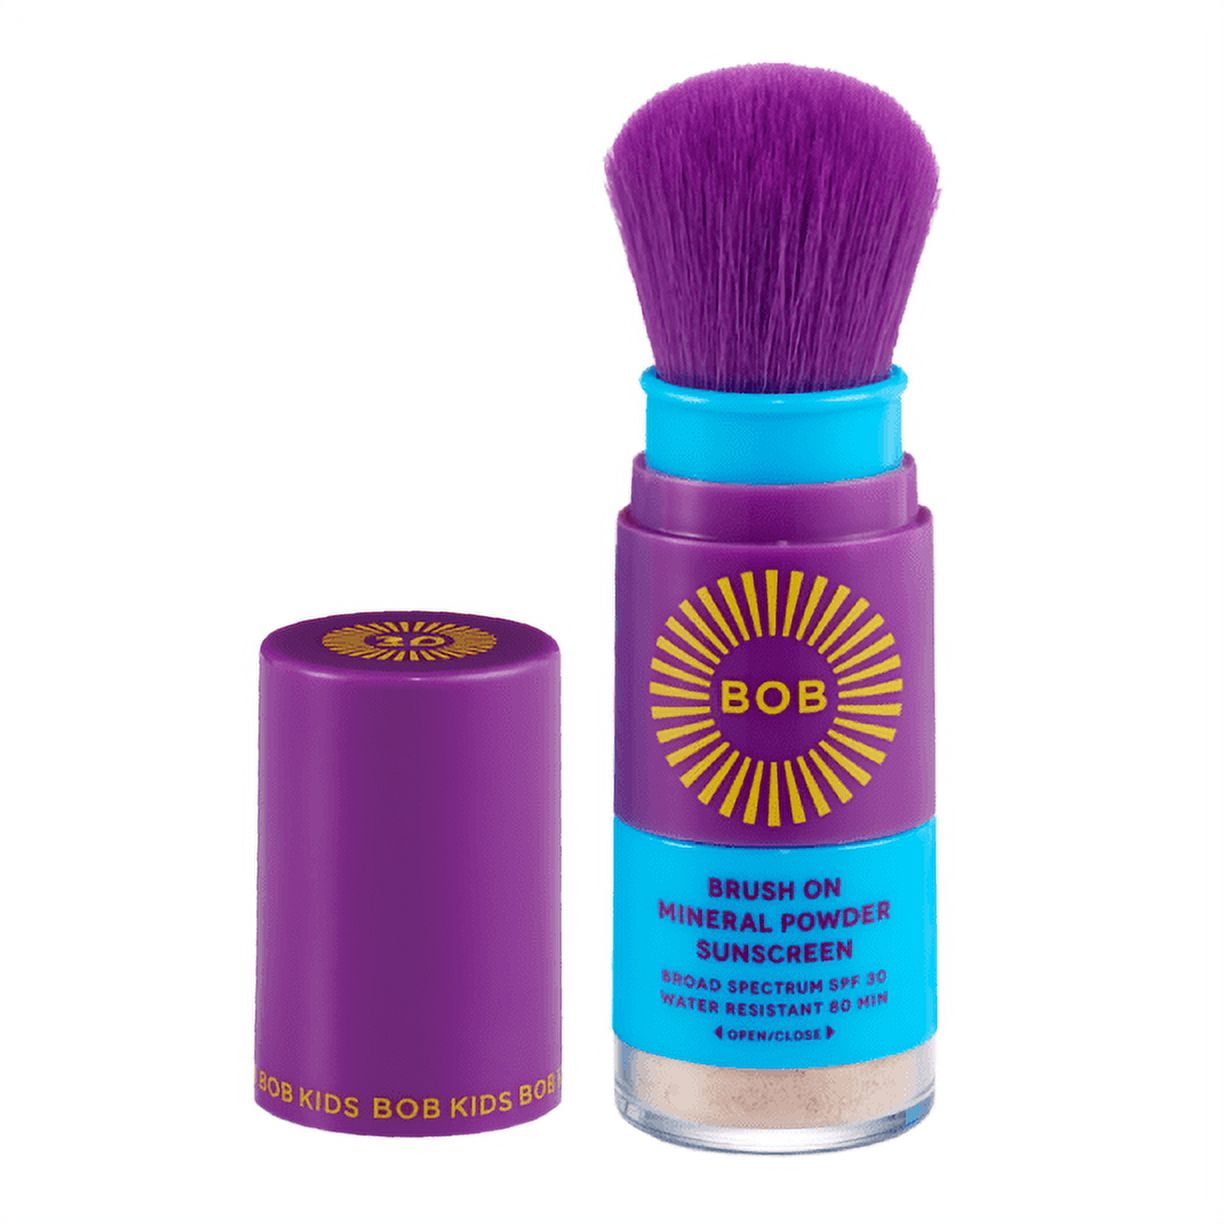 Brush on Block Mineral Ready For Anything Kit Powder Sunscreen